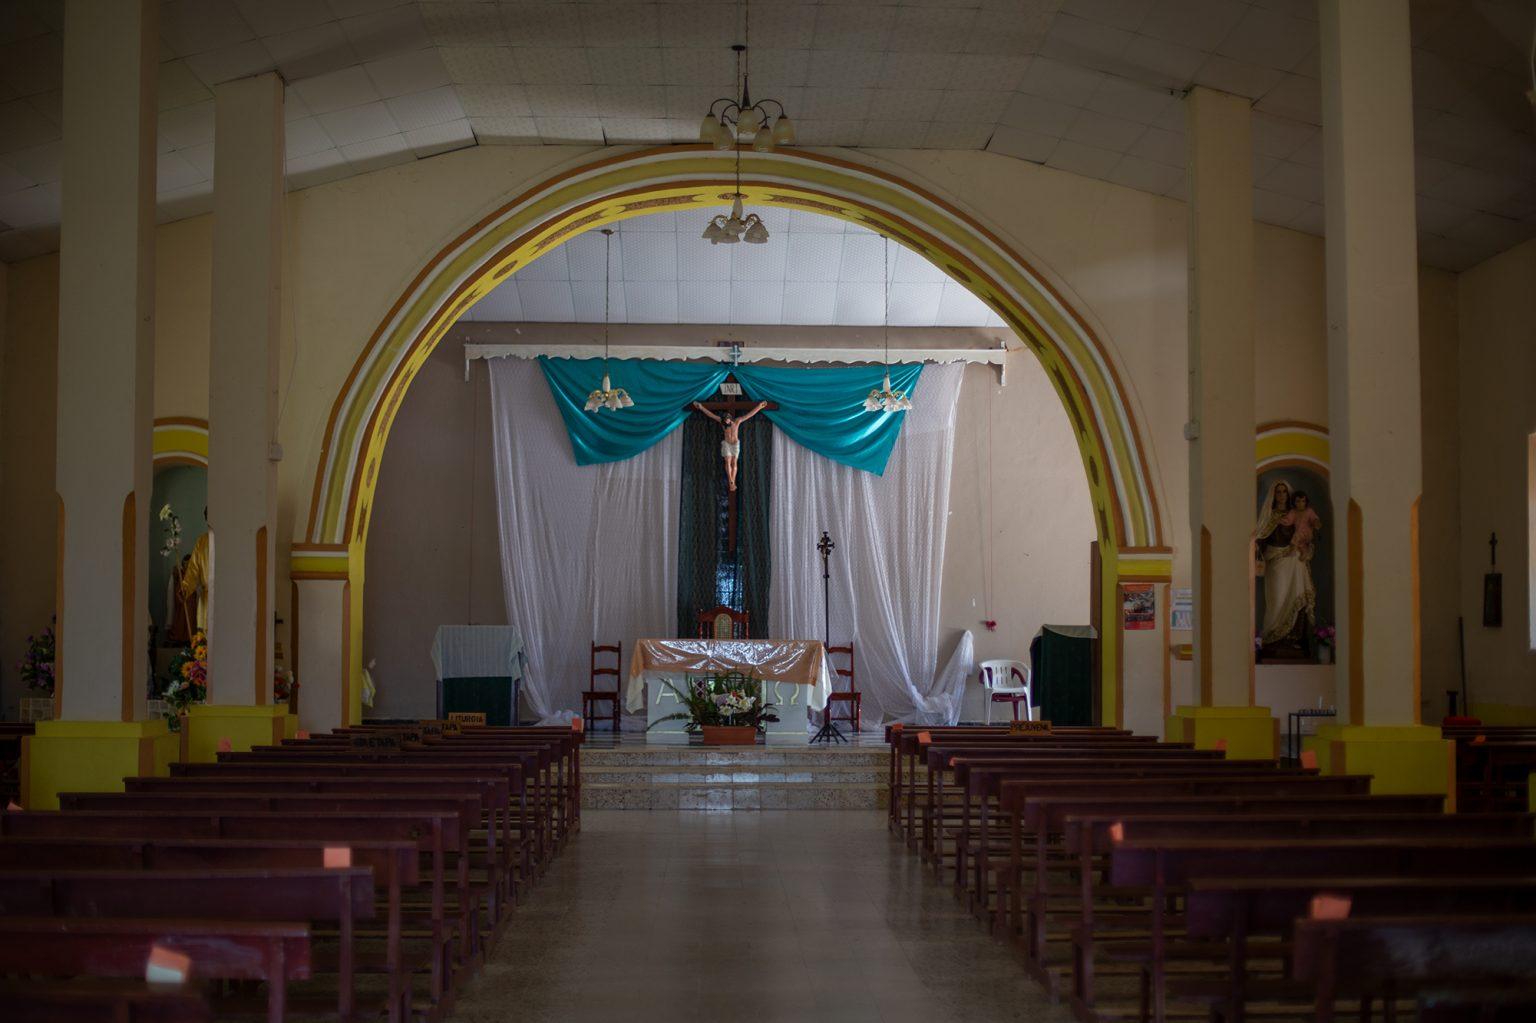 The Catholic church in the Florida community has been empty during the pandemic. Opatoro, La Paz, August 8 2020. Photo: Martín Cálix